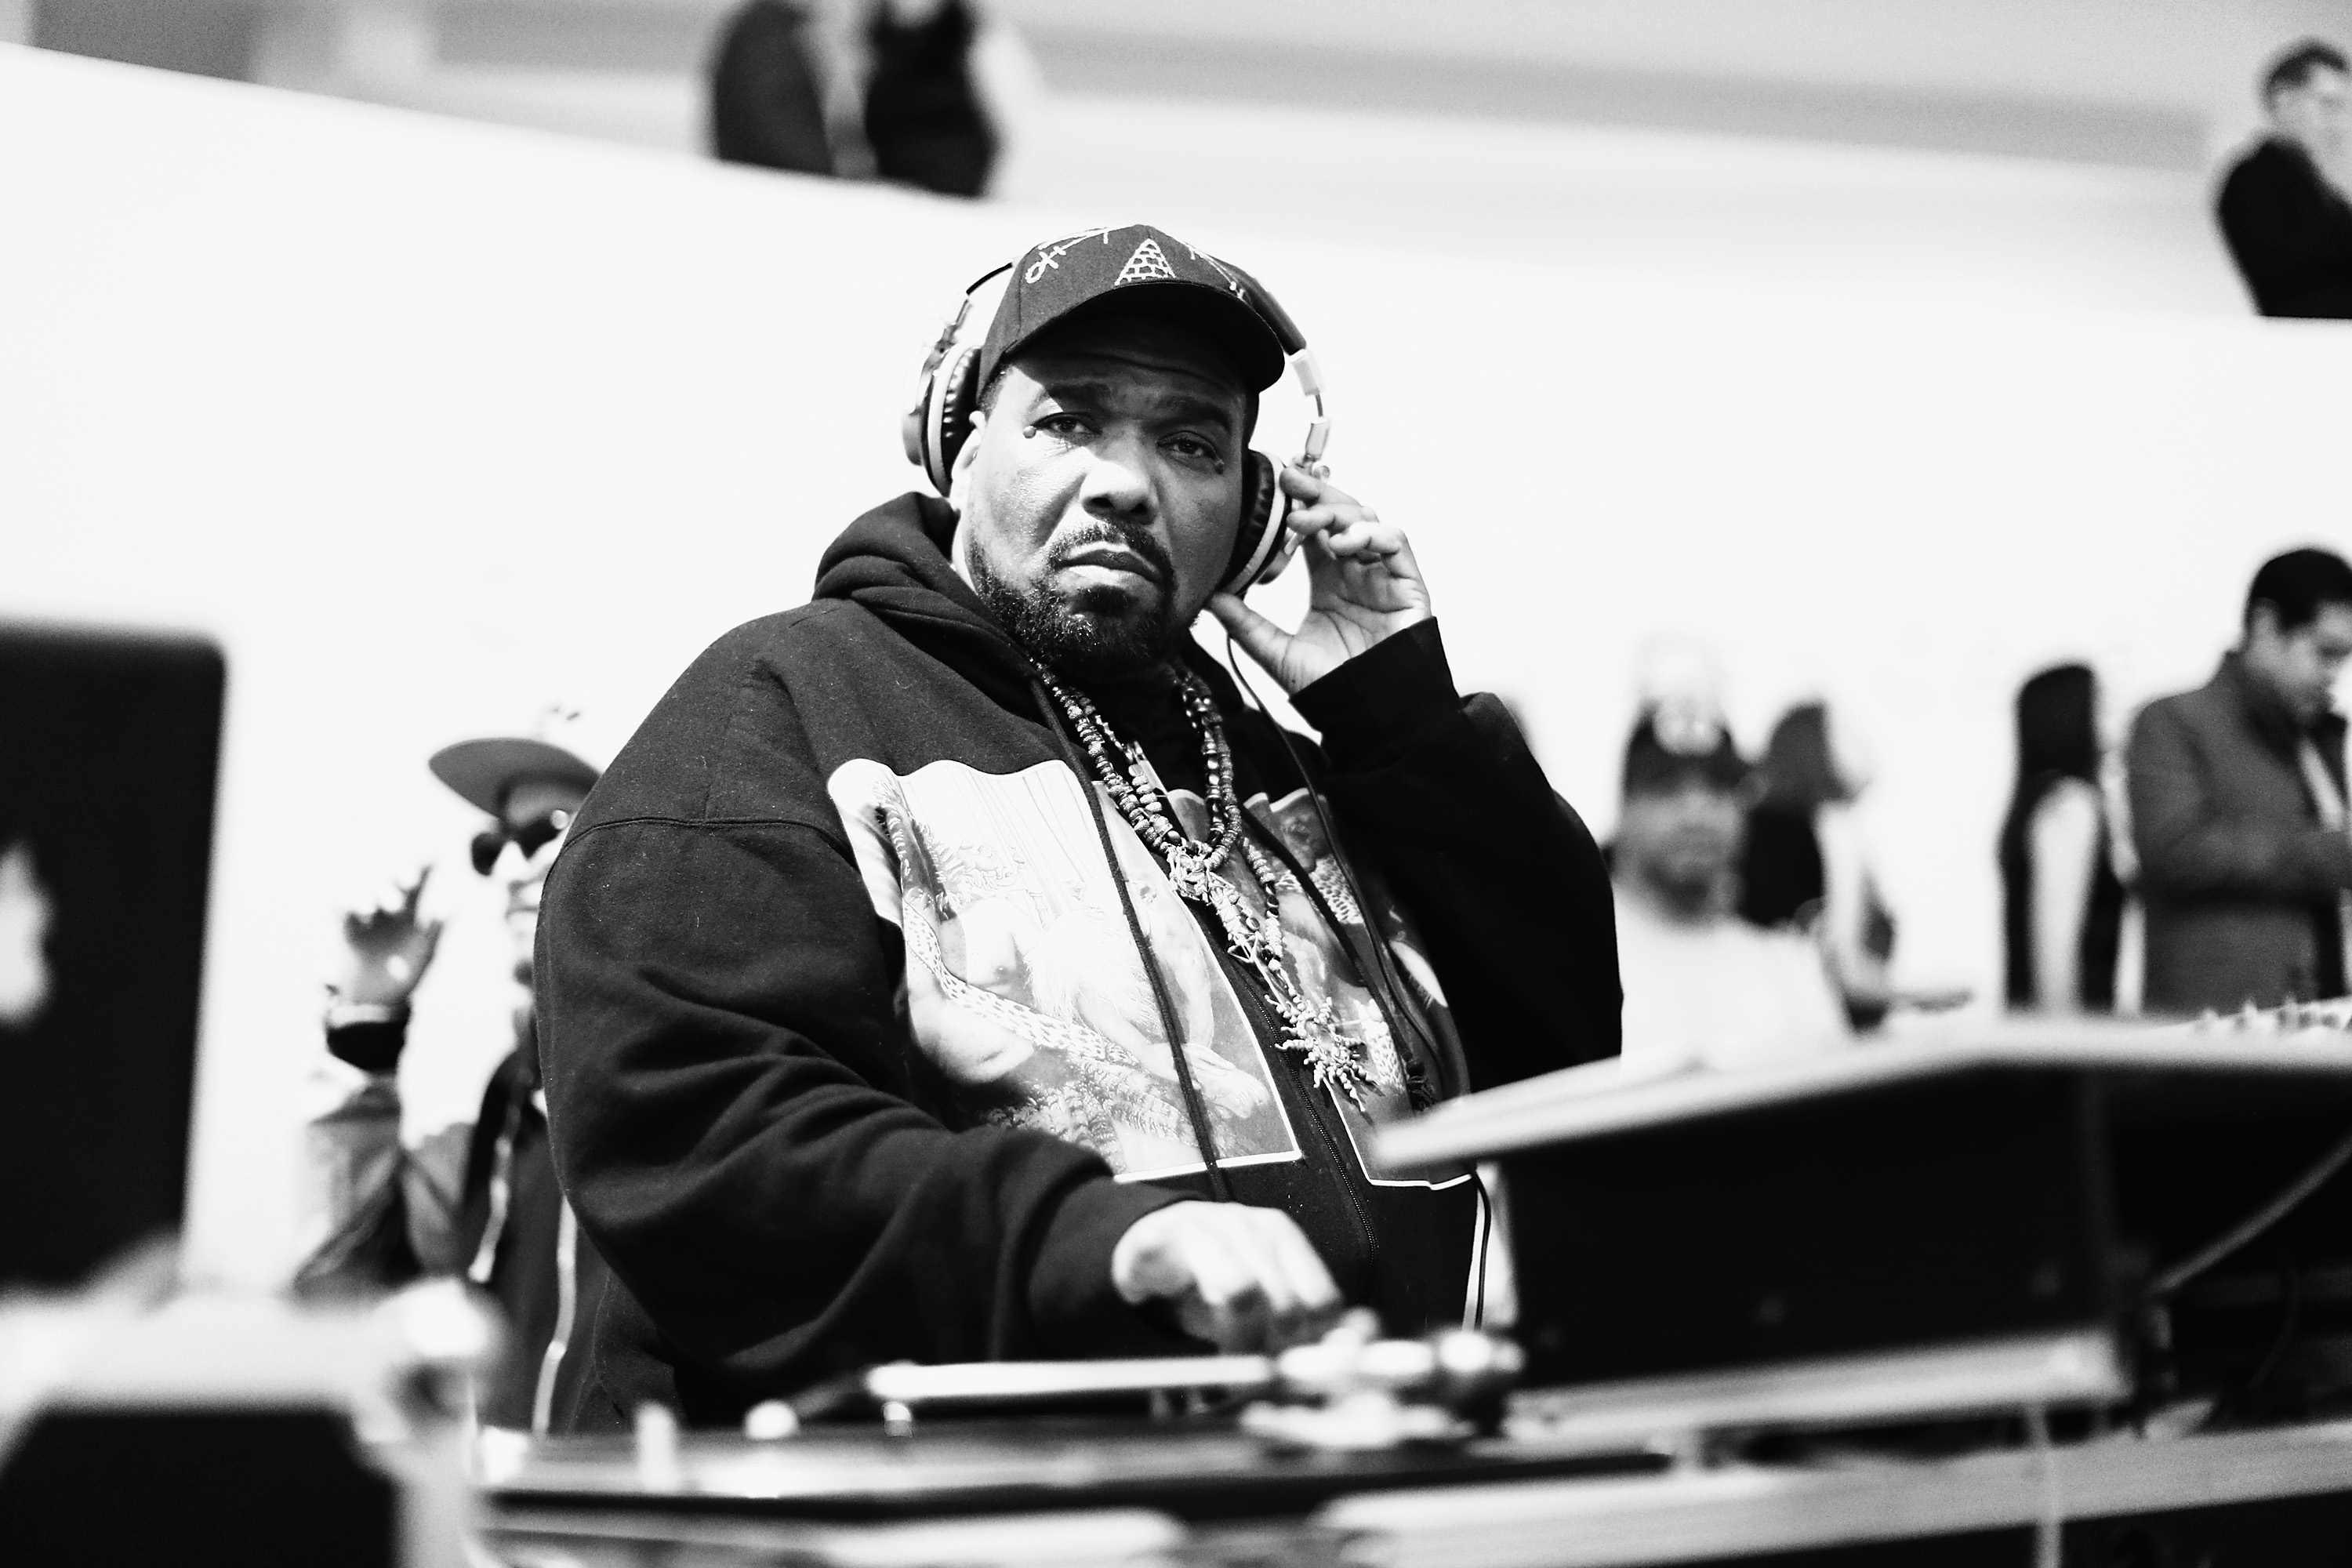 READ: Afrika Bambaataa’s Accusers Detail Alleged Sexual Assaults and Cover-up